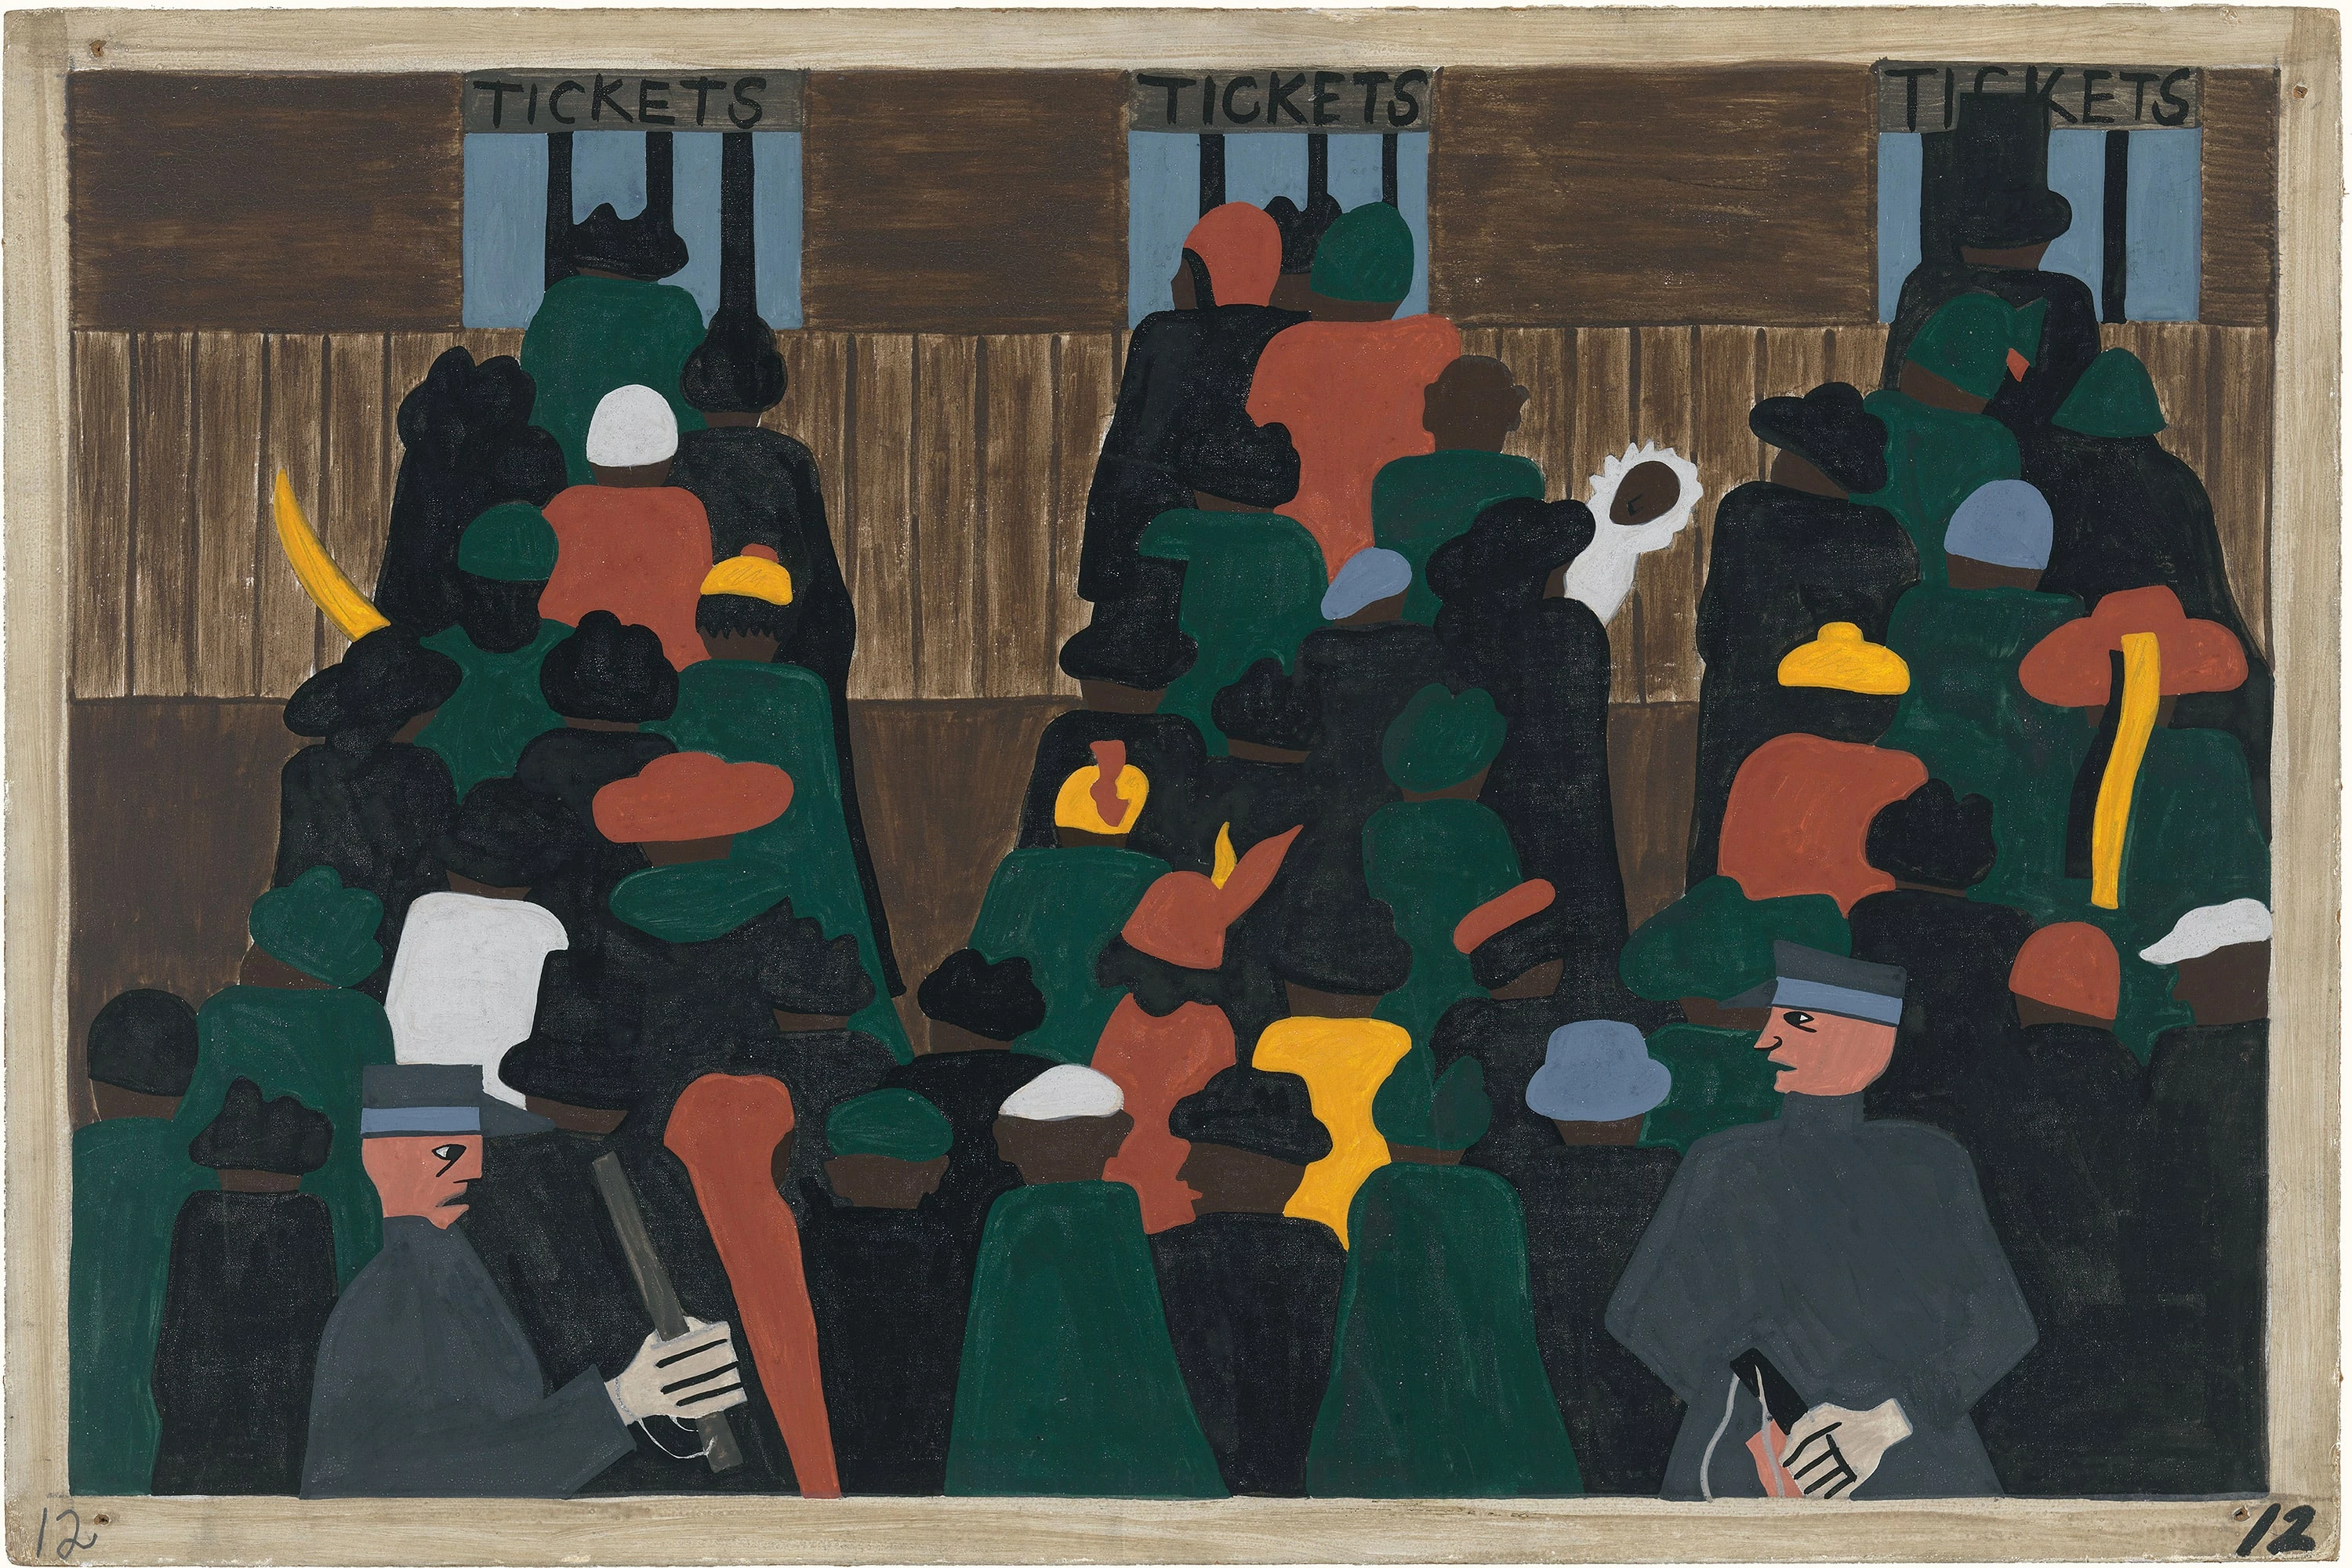 Migration Series No.12: The railroad stations were at times so crowded with people leaving that special guards had to be called to keep order, Jacob Lawrence